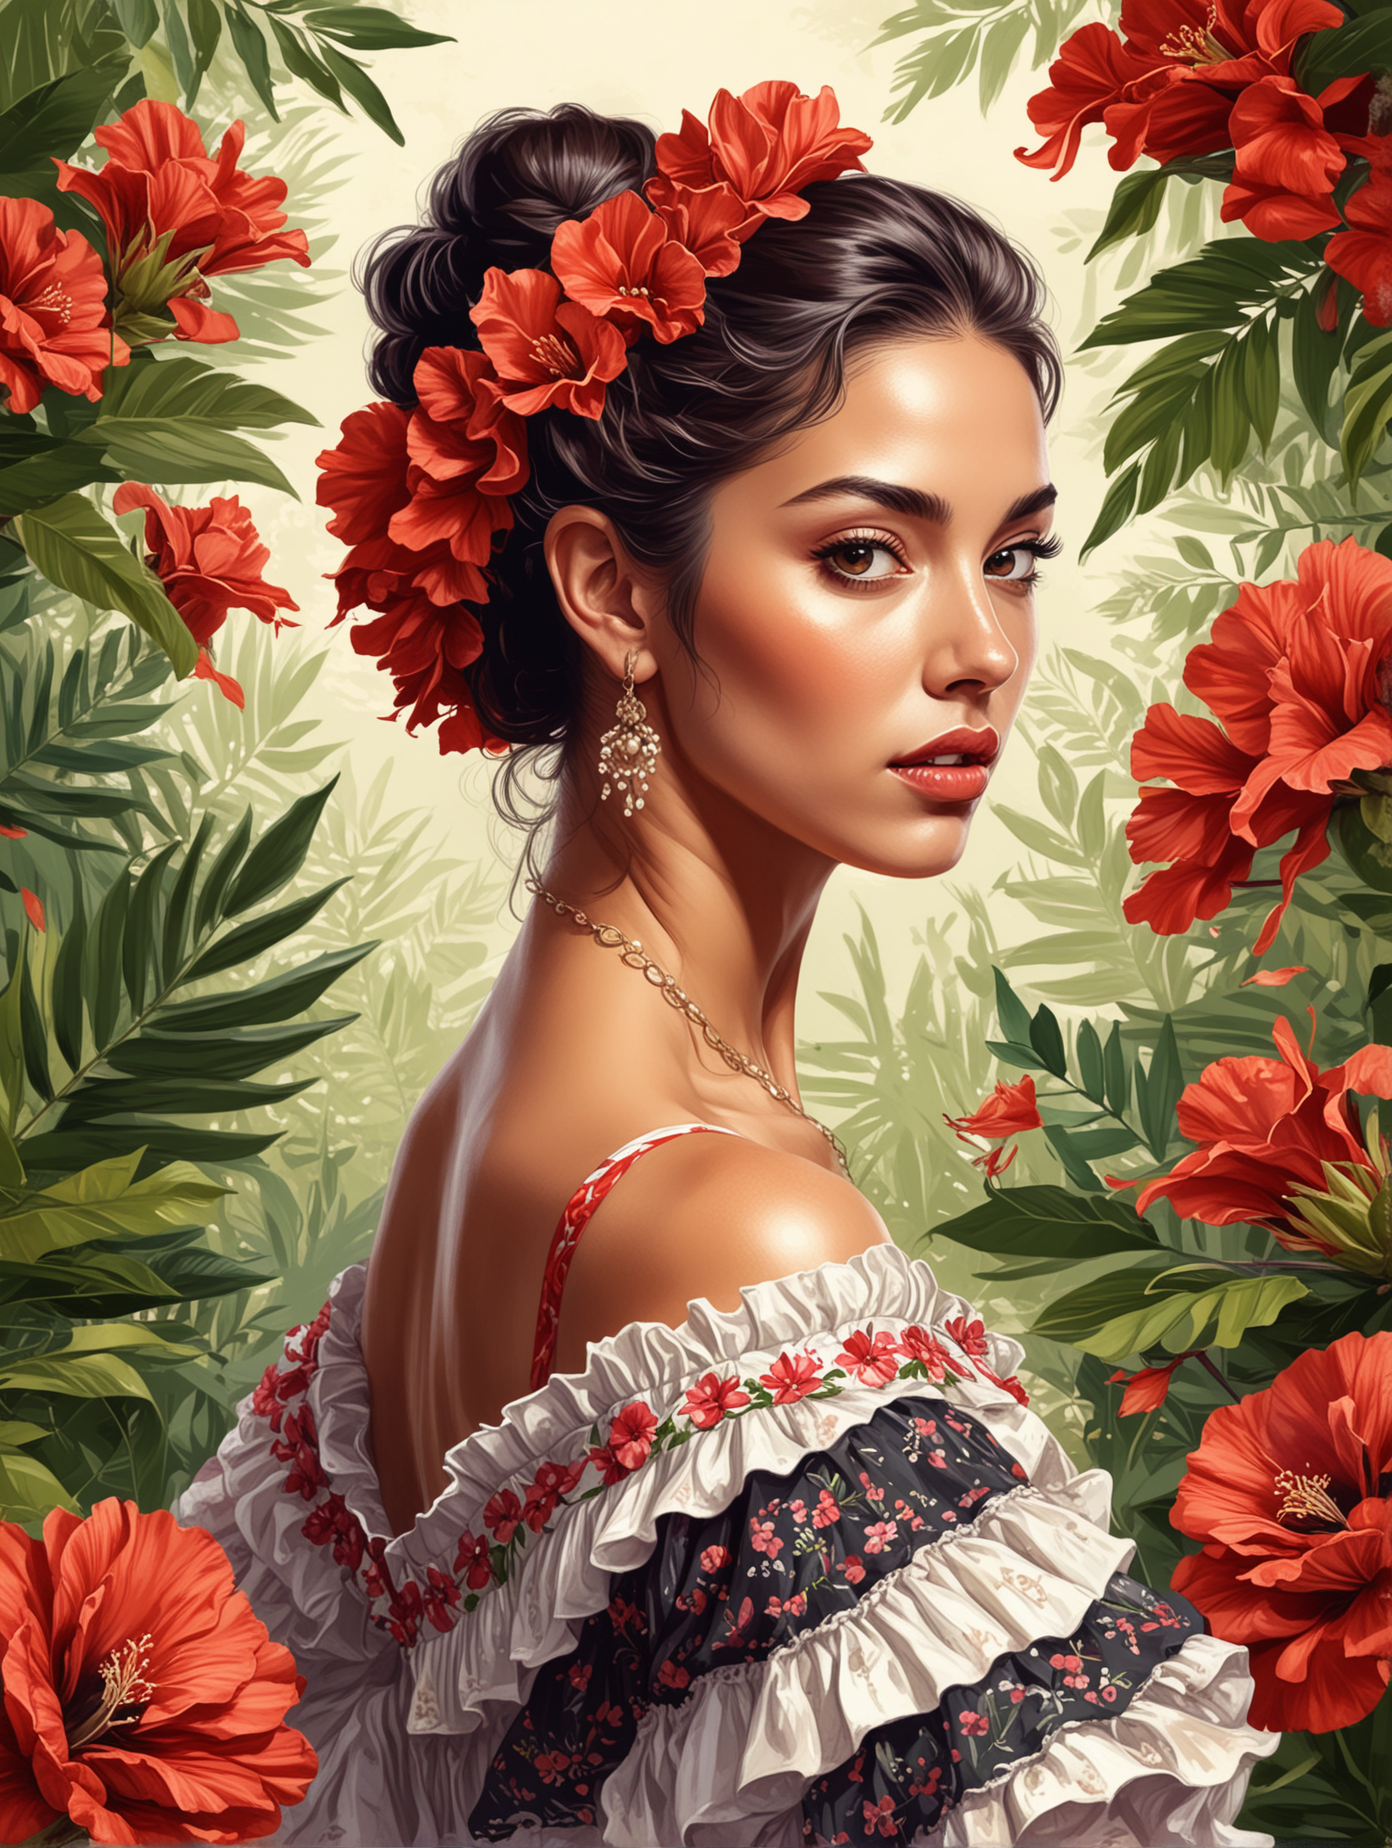 Flamenco Dancer in Traditional Dress with Floral Background